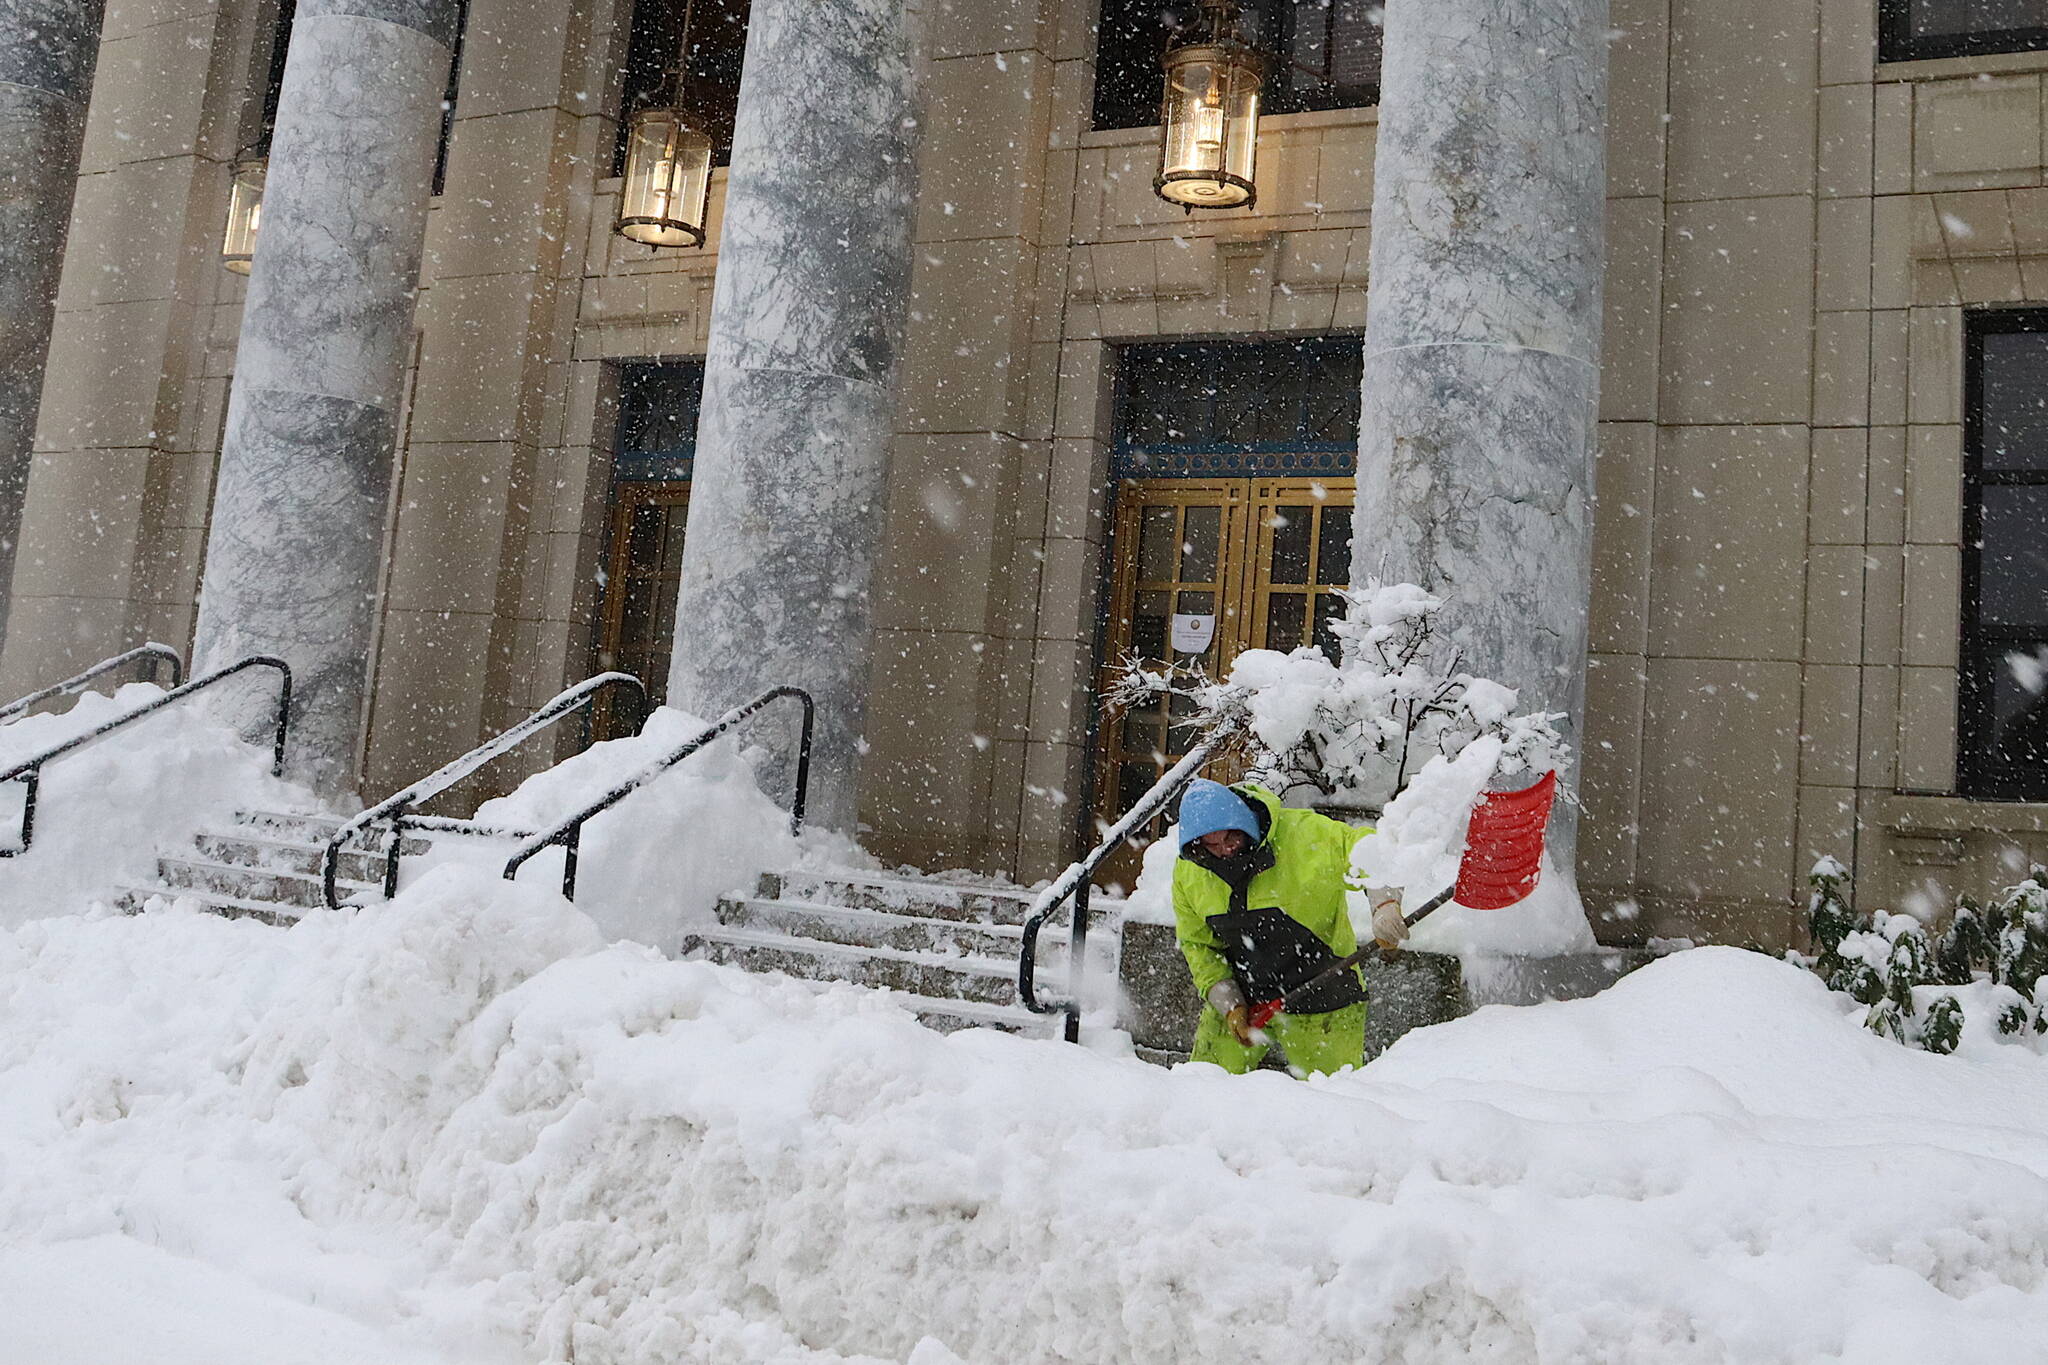 Jason Skidmore shovels snow along the sidewalk in front of the Alaska State Capitol on Monday. Most legislators and staff were able to get to Juneau in time for the start of the session Tuesday. (Mark Sabbatini / Juneau Empire)